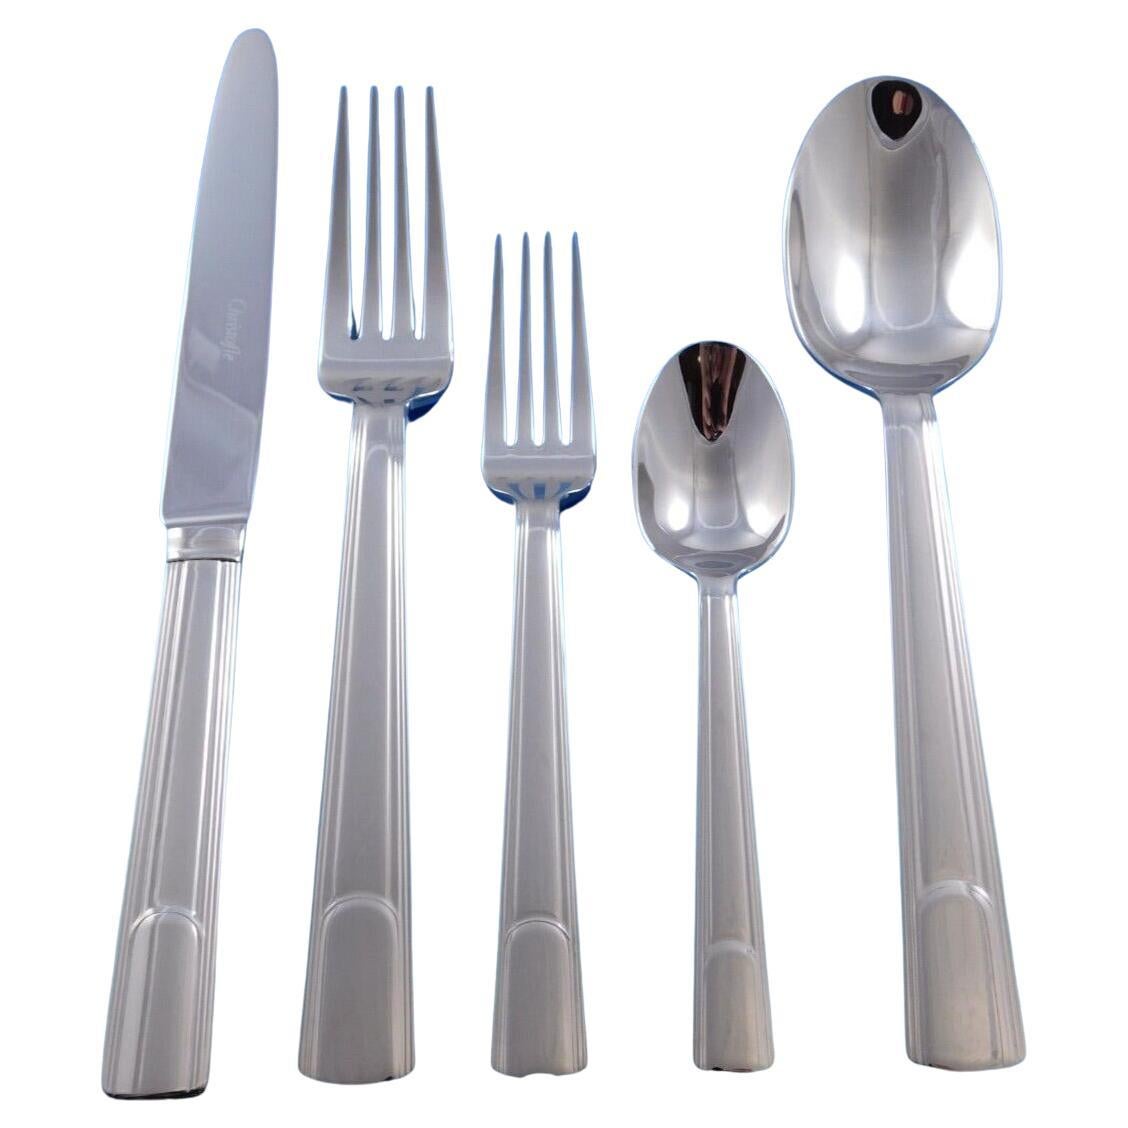 Hudson by Christofle Stainless Steel Flatware set 30 pc Modern IN BOOK New